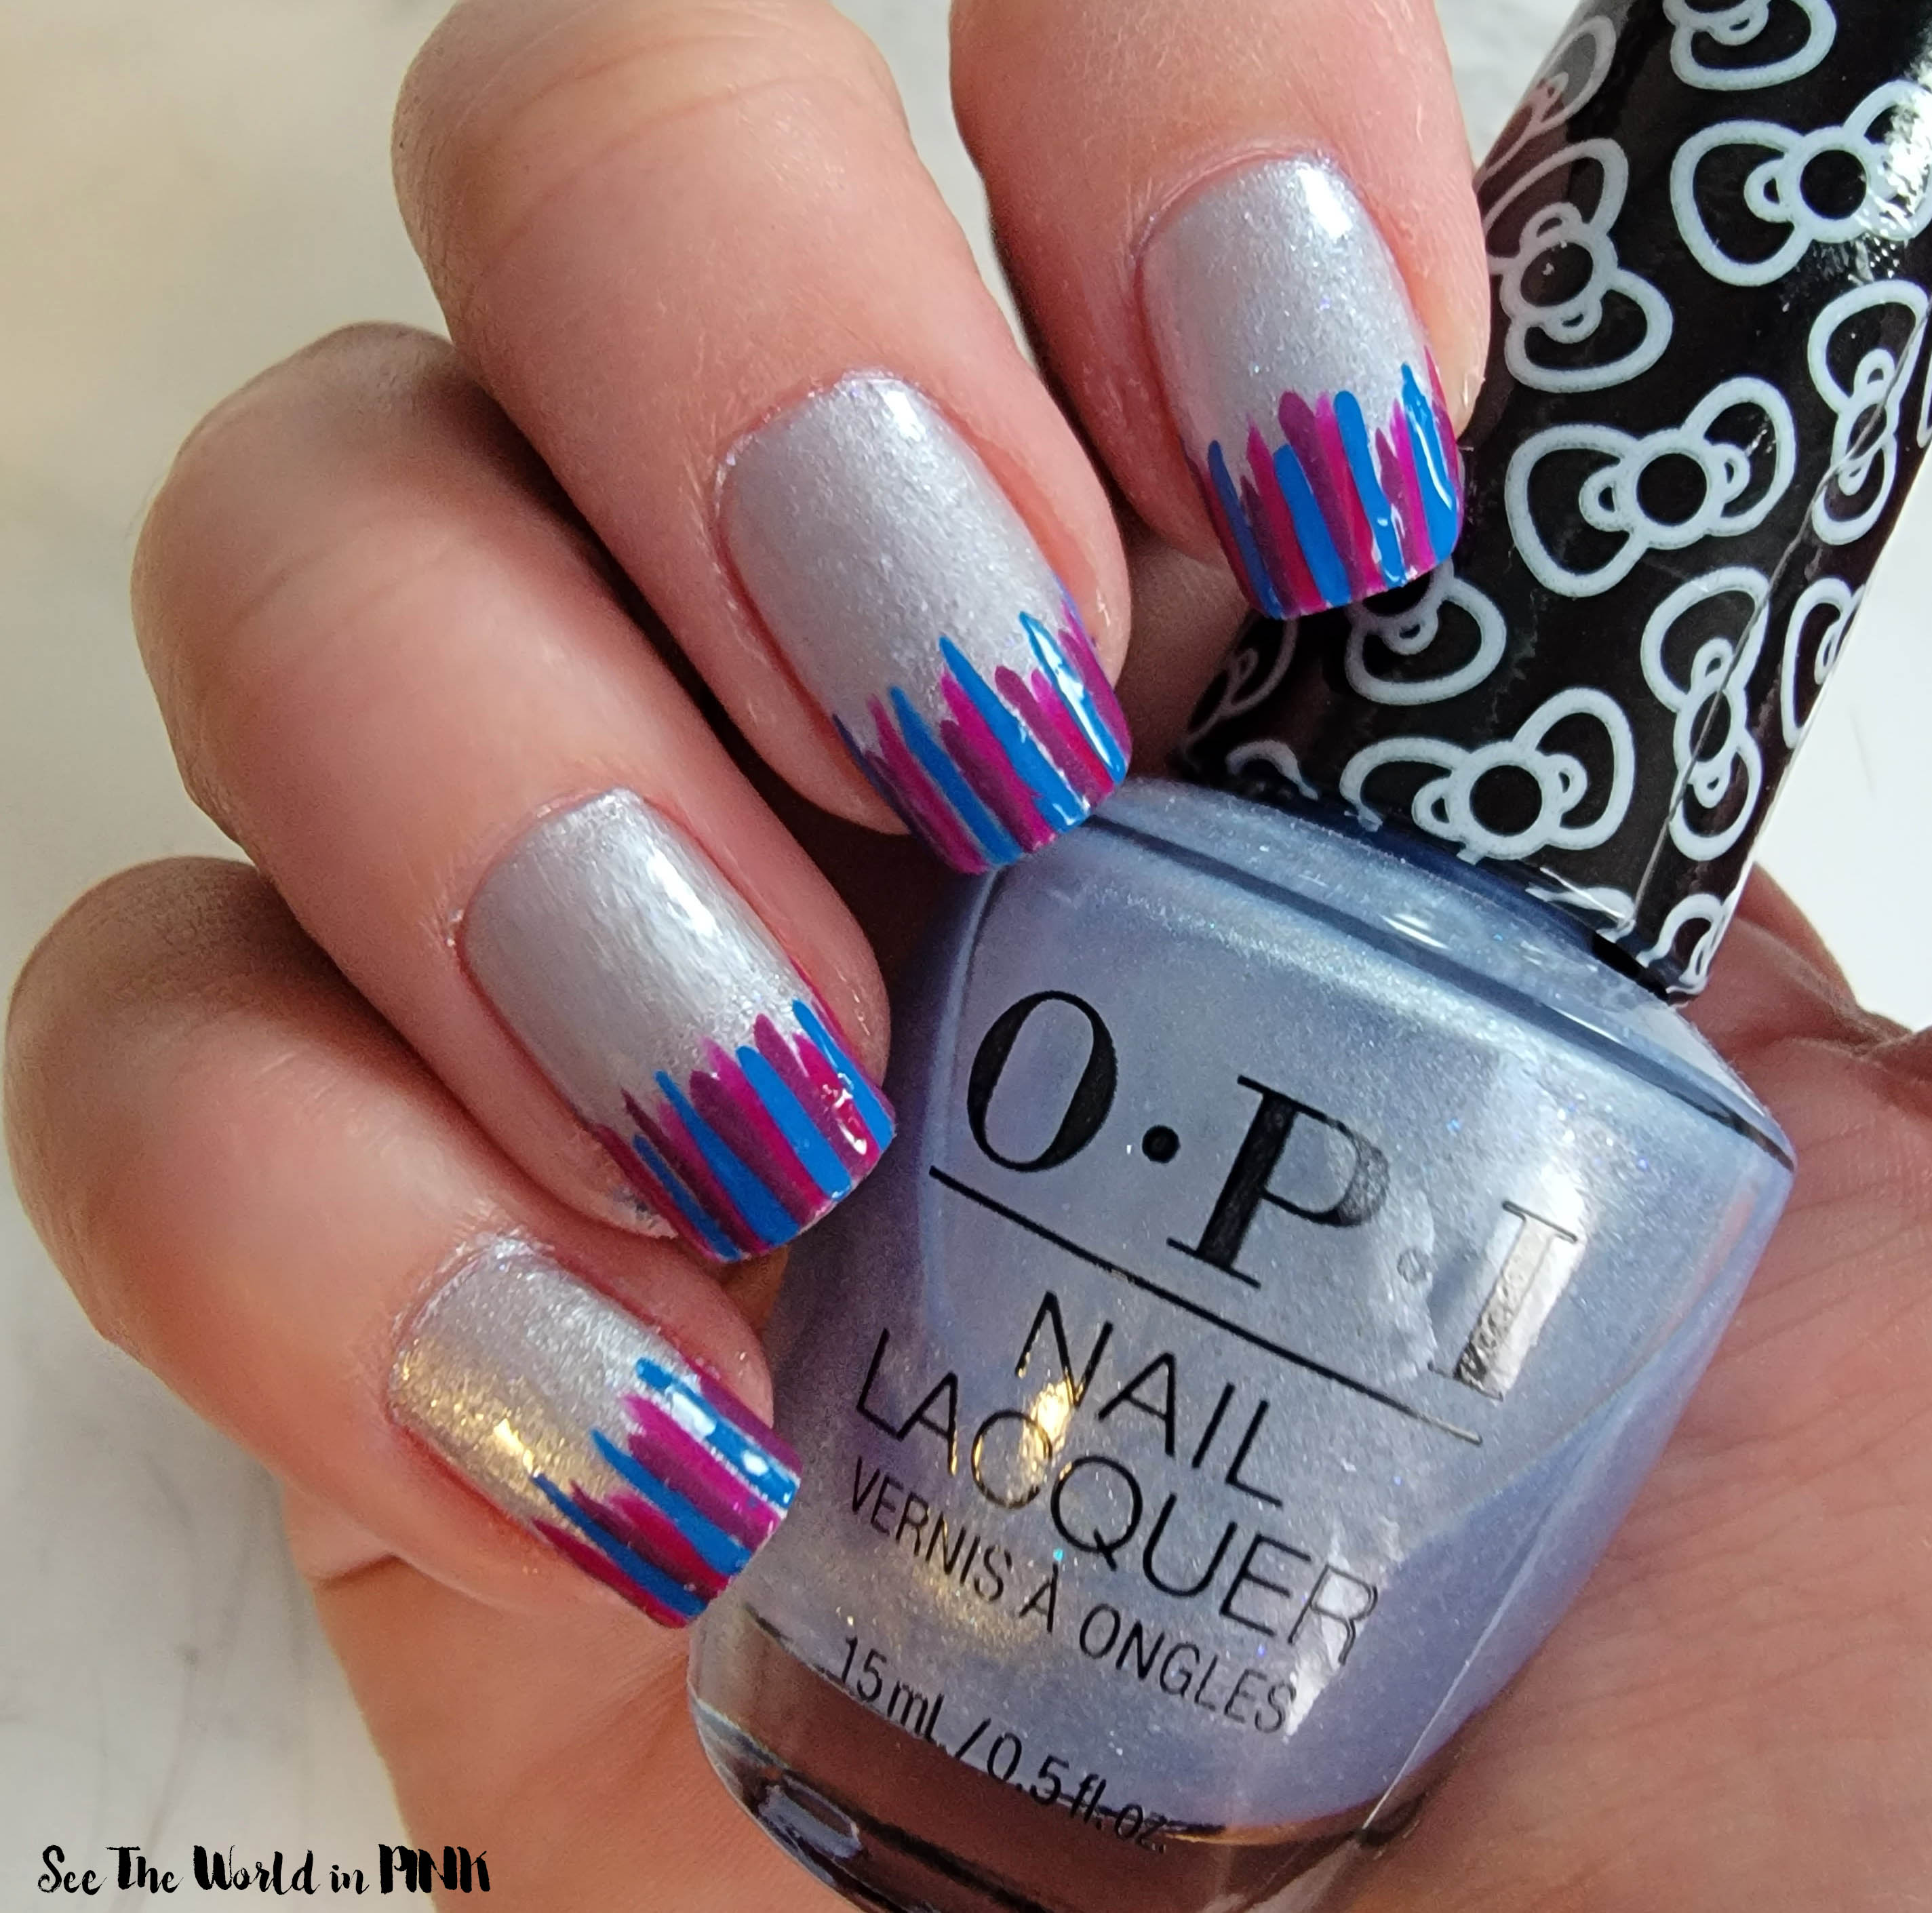 Manicure Monday - Pride Month Bi-Flag Nails | See the World in PINK